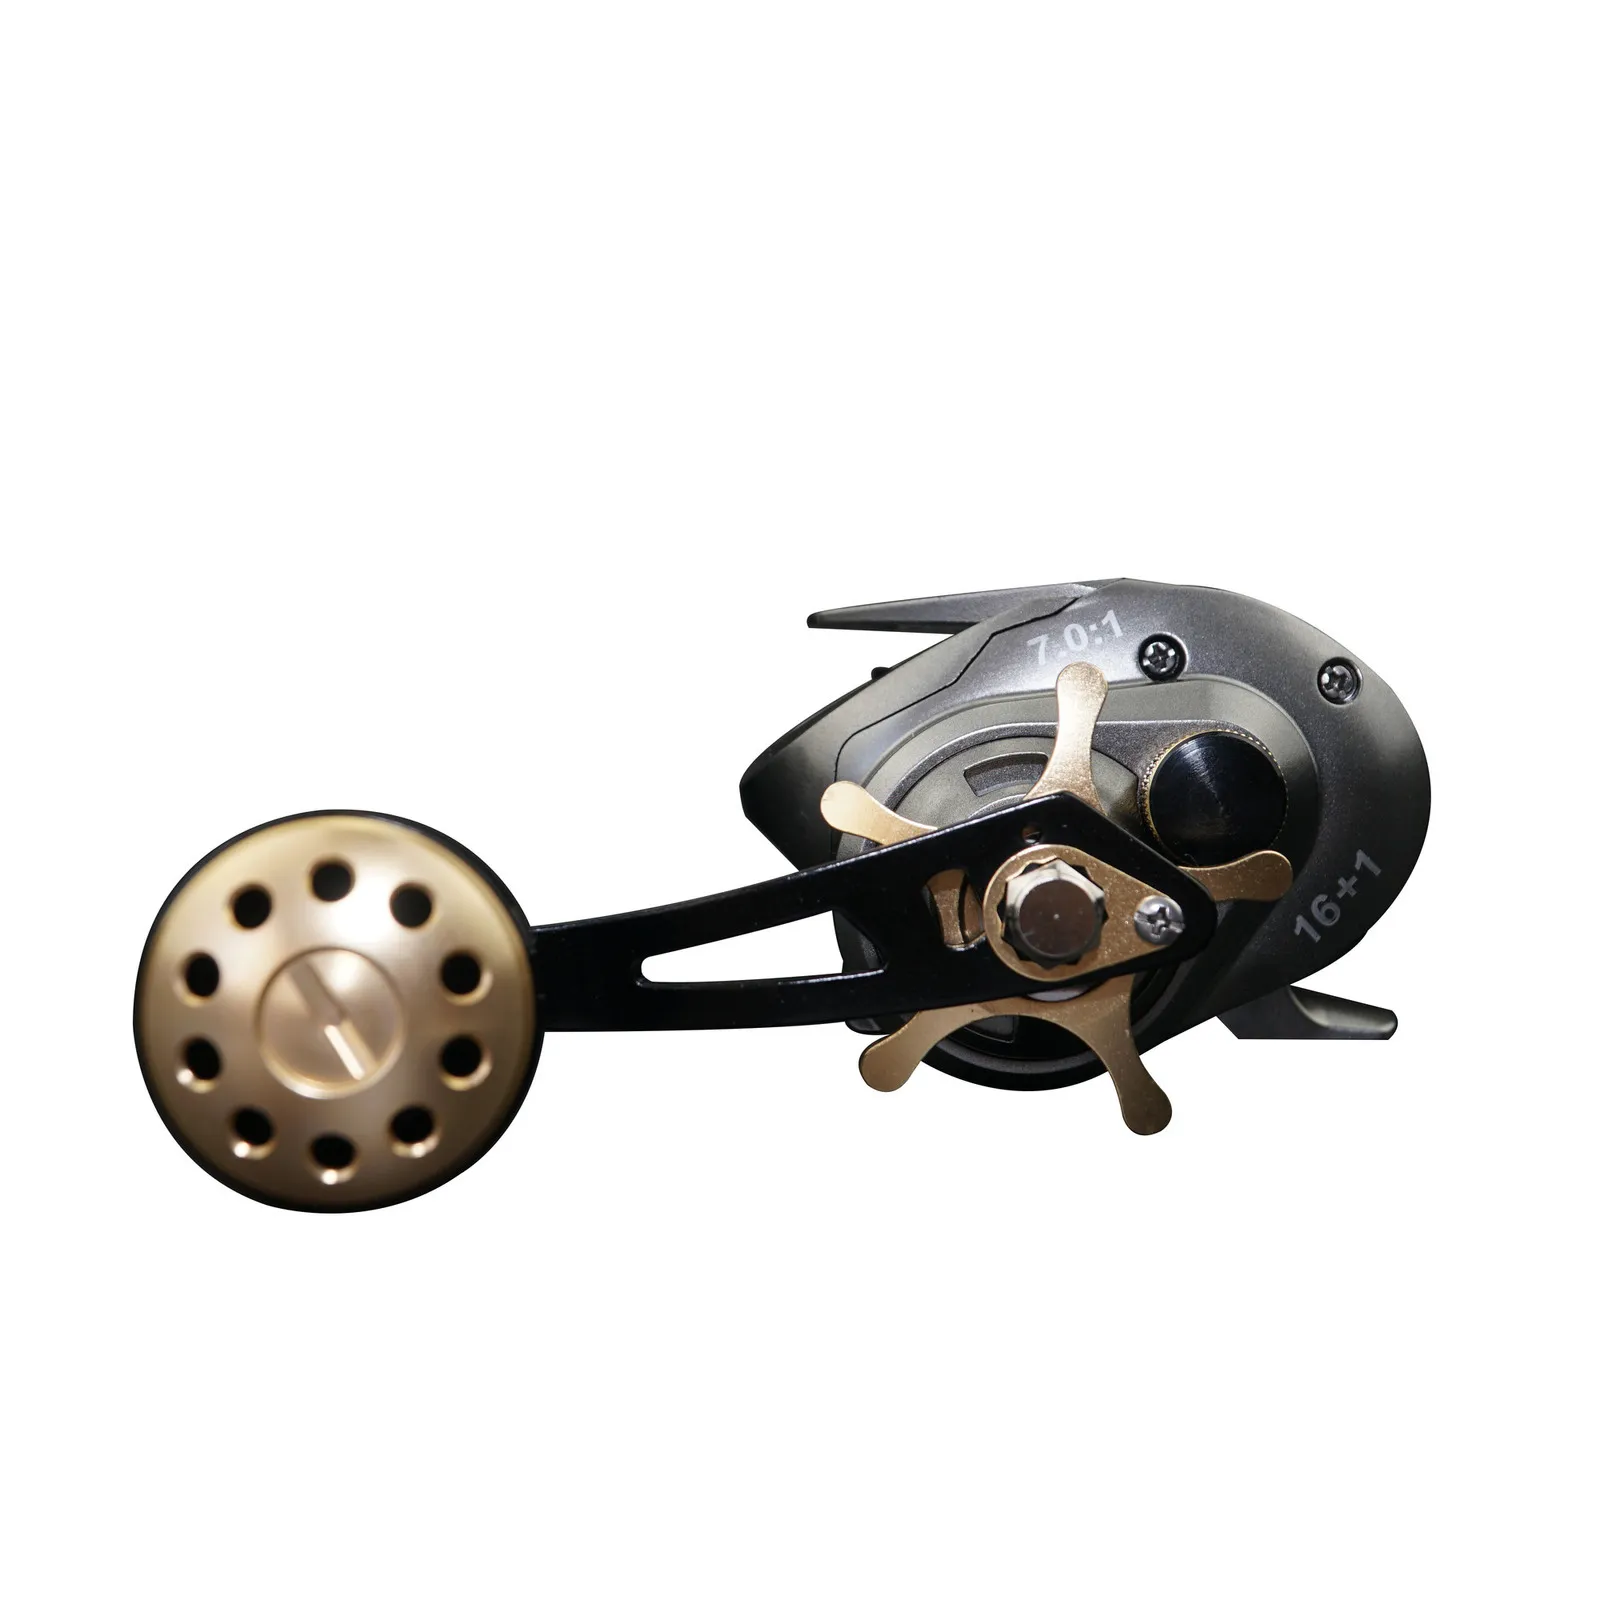 HiUmi Baitcasting Okuma Reels 33 Pounds Max Drag Low Profile For Big Game  Bats And Boats Fishing Reels 230617 From Huo06, $45.82